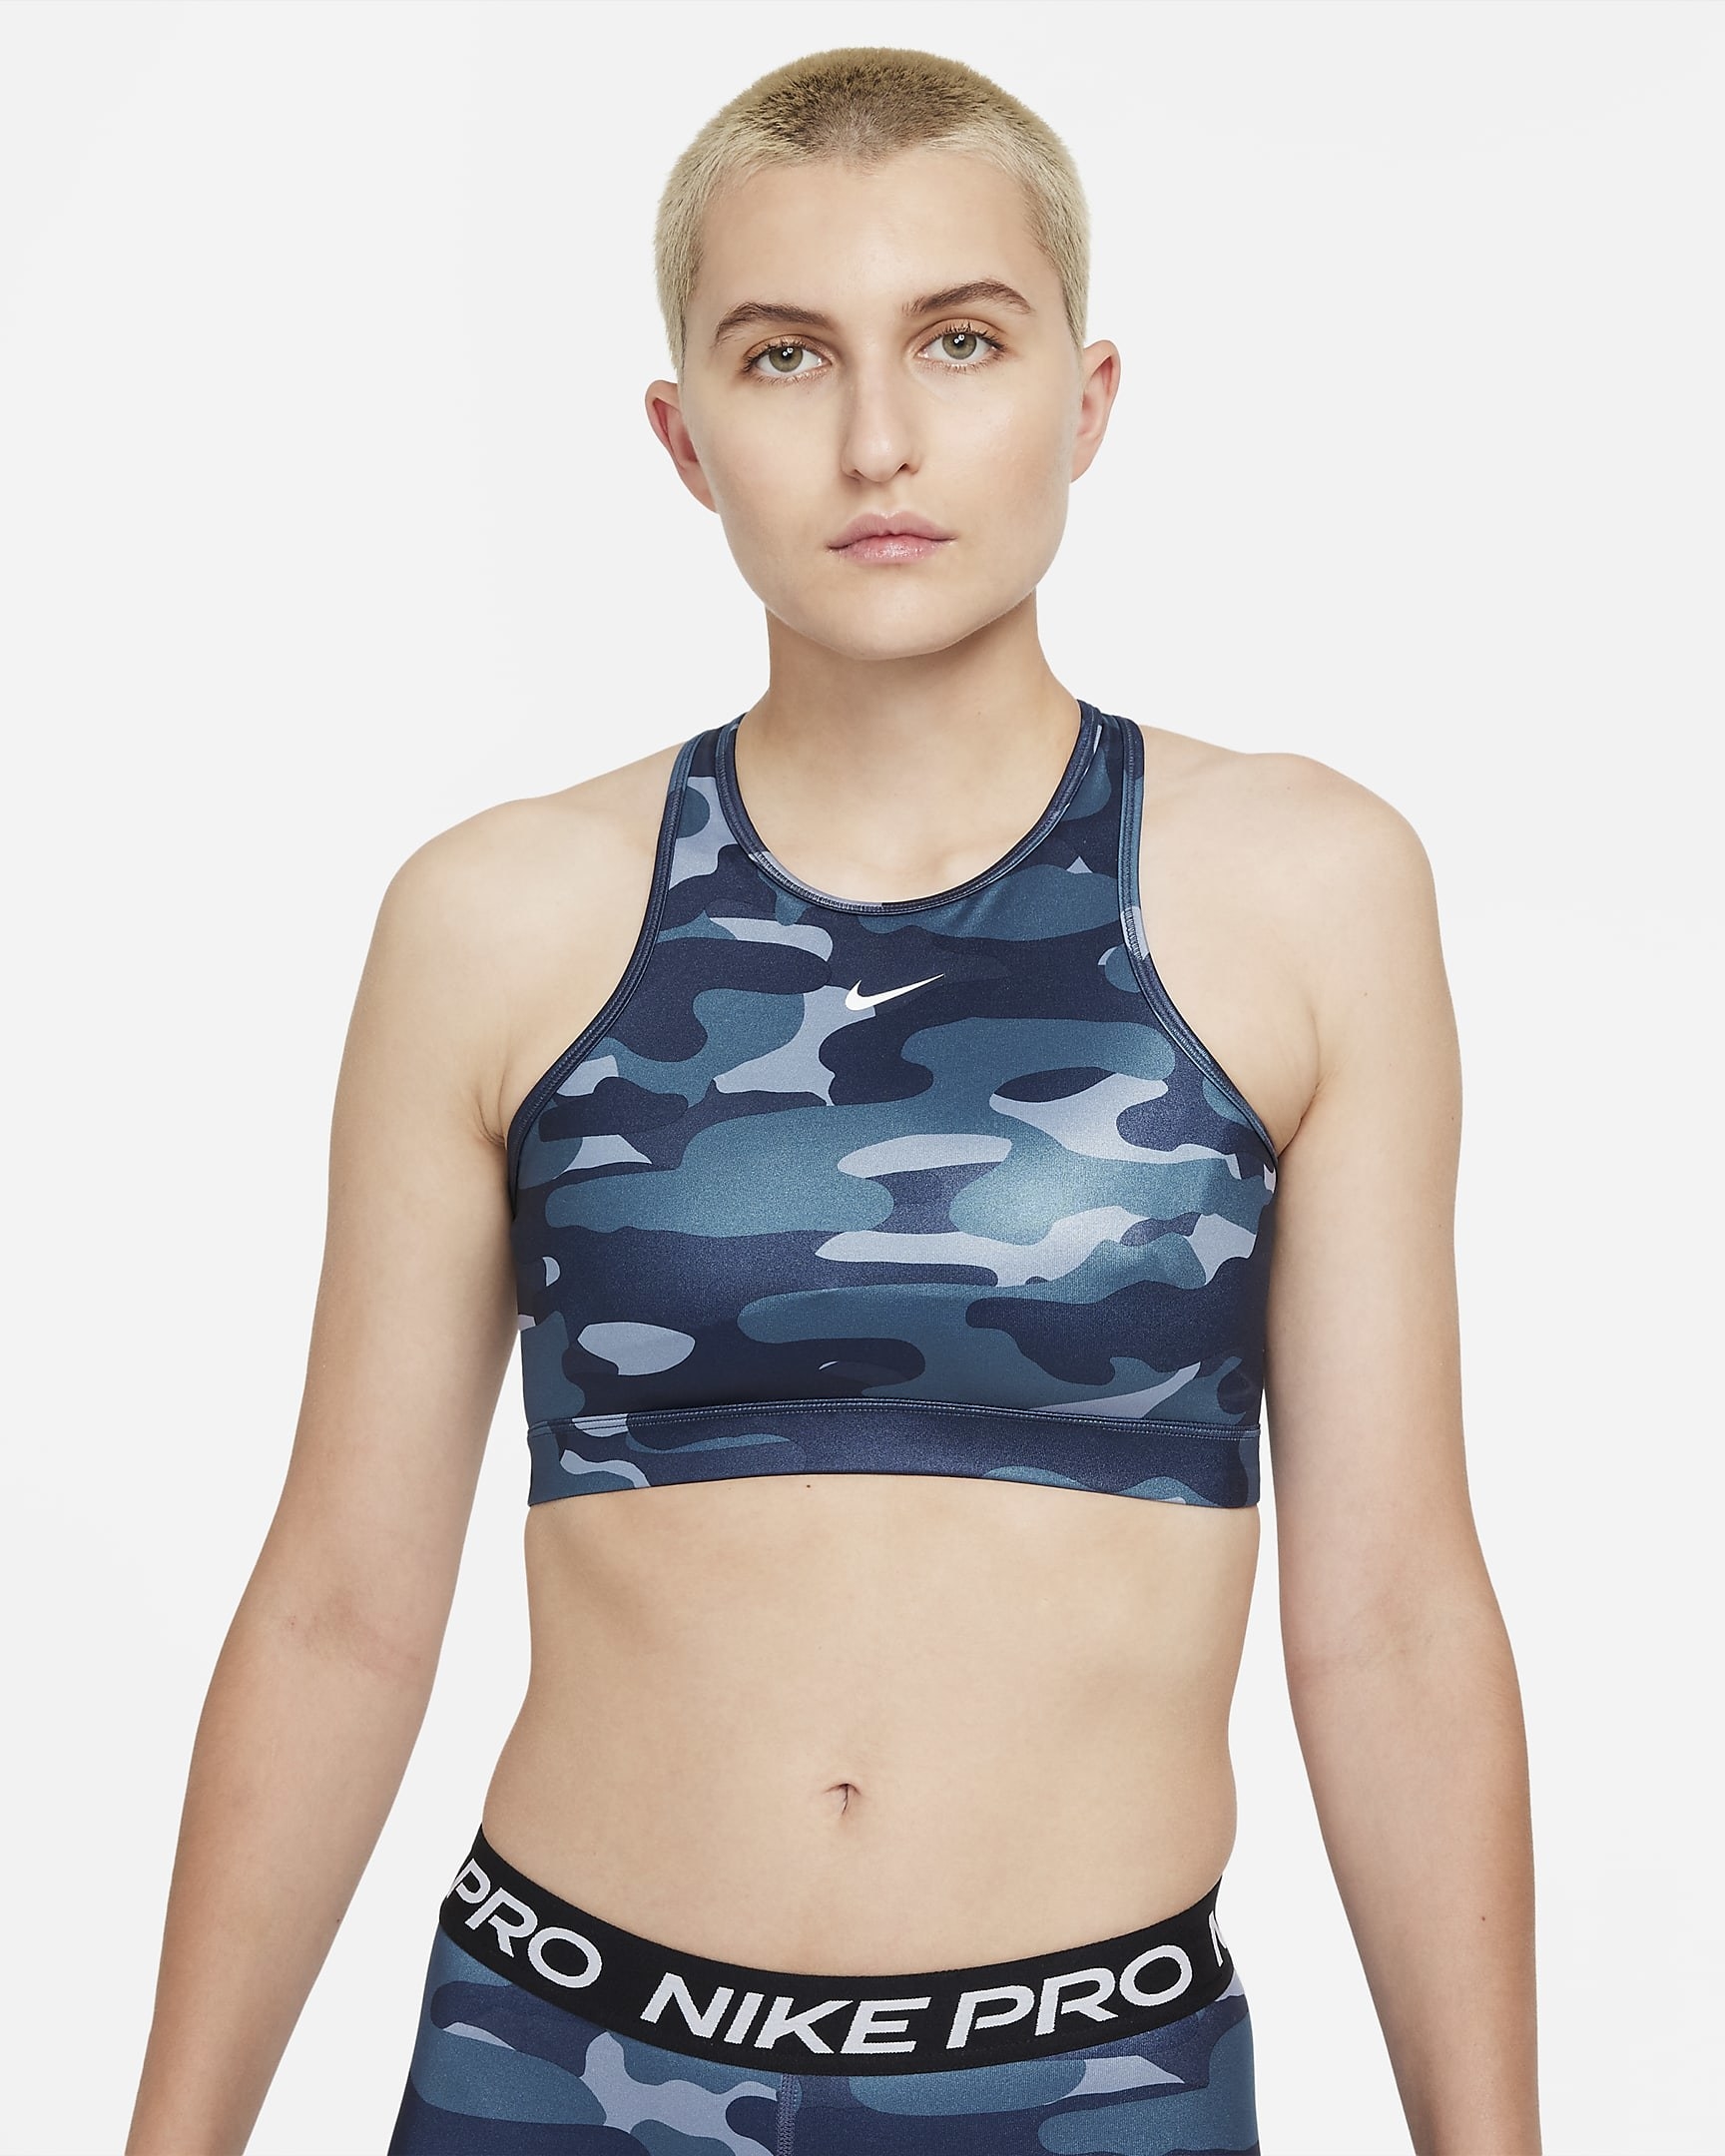 model in blue camouflage print high-neck sports bra